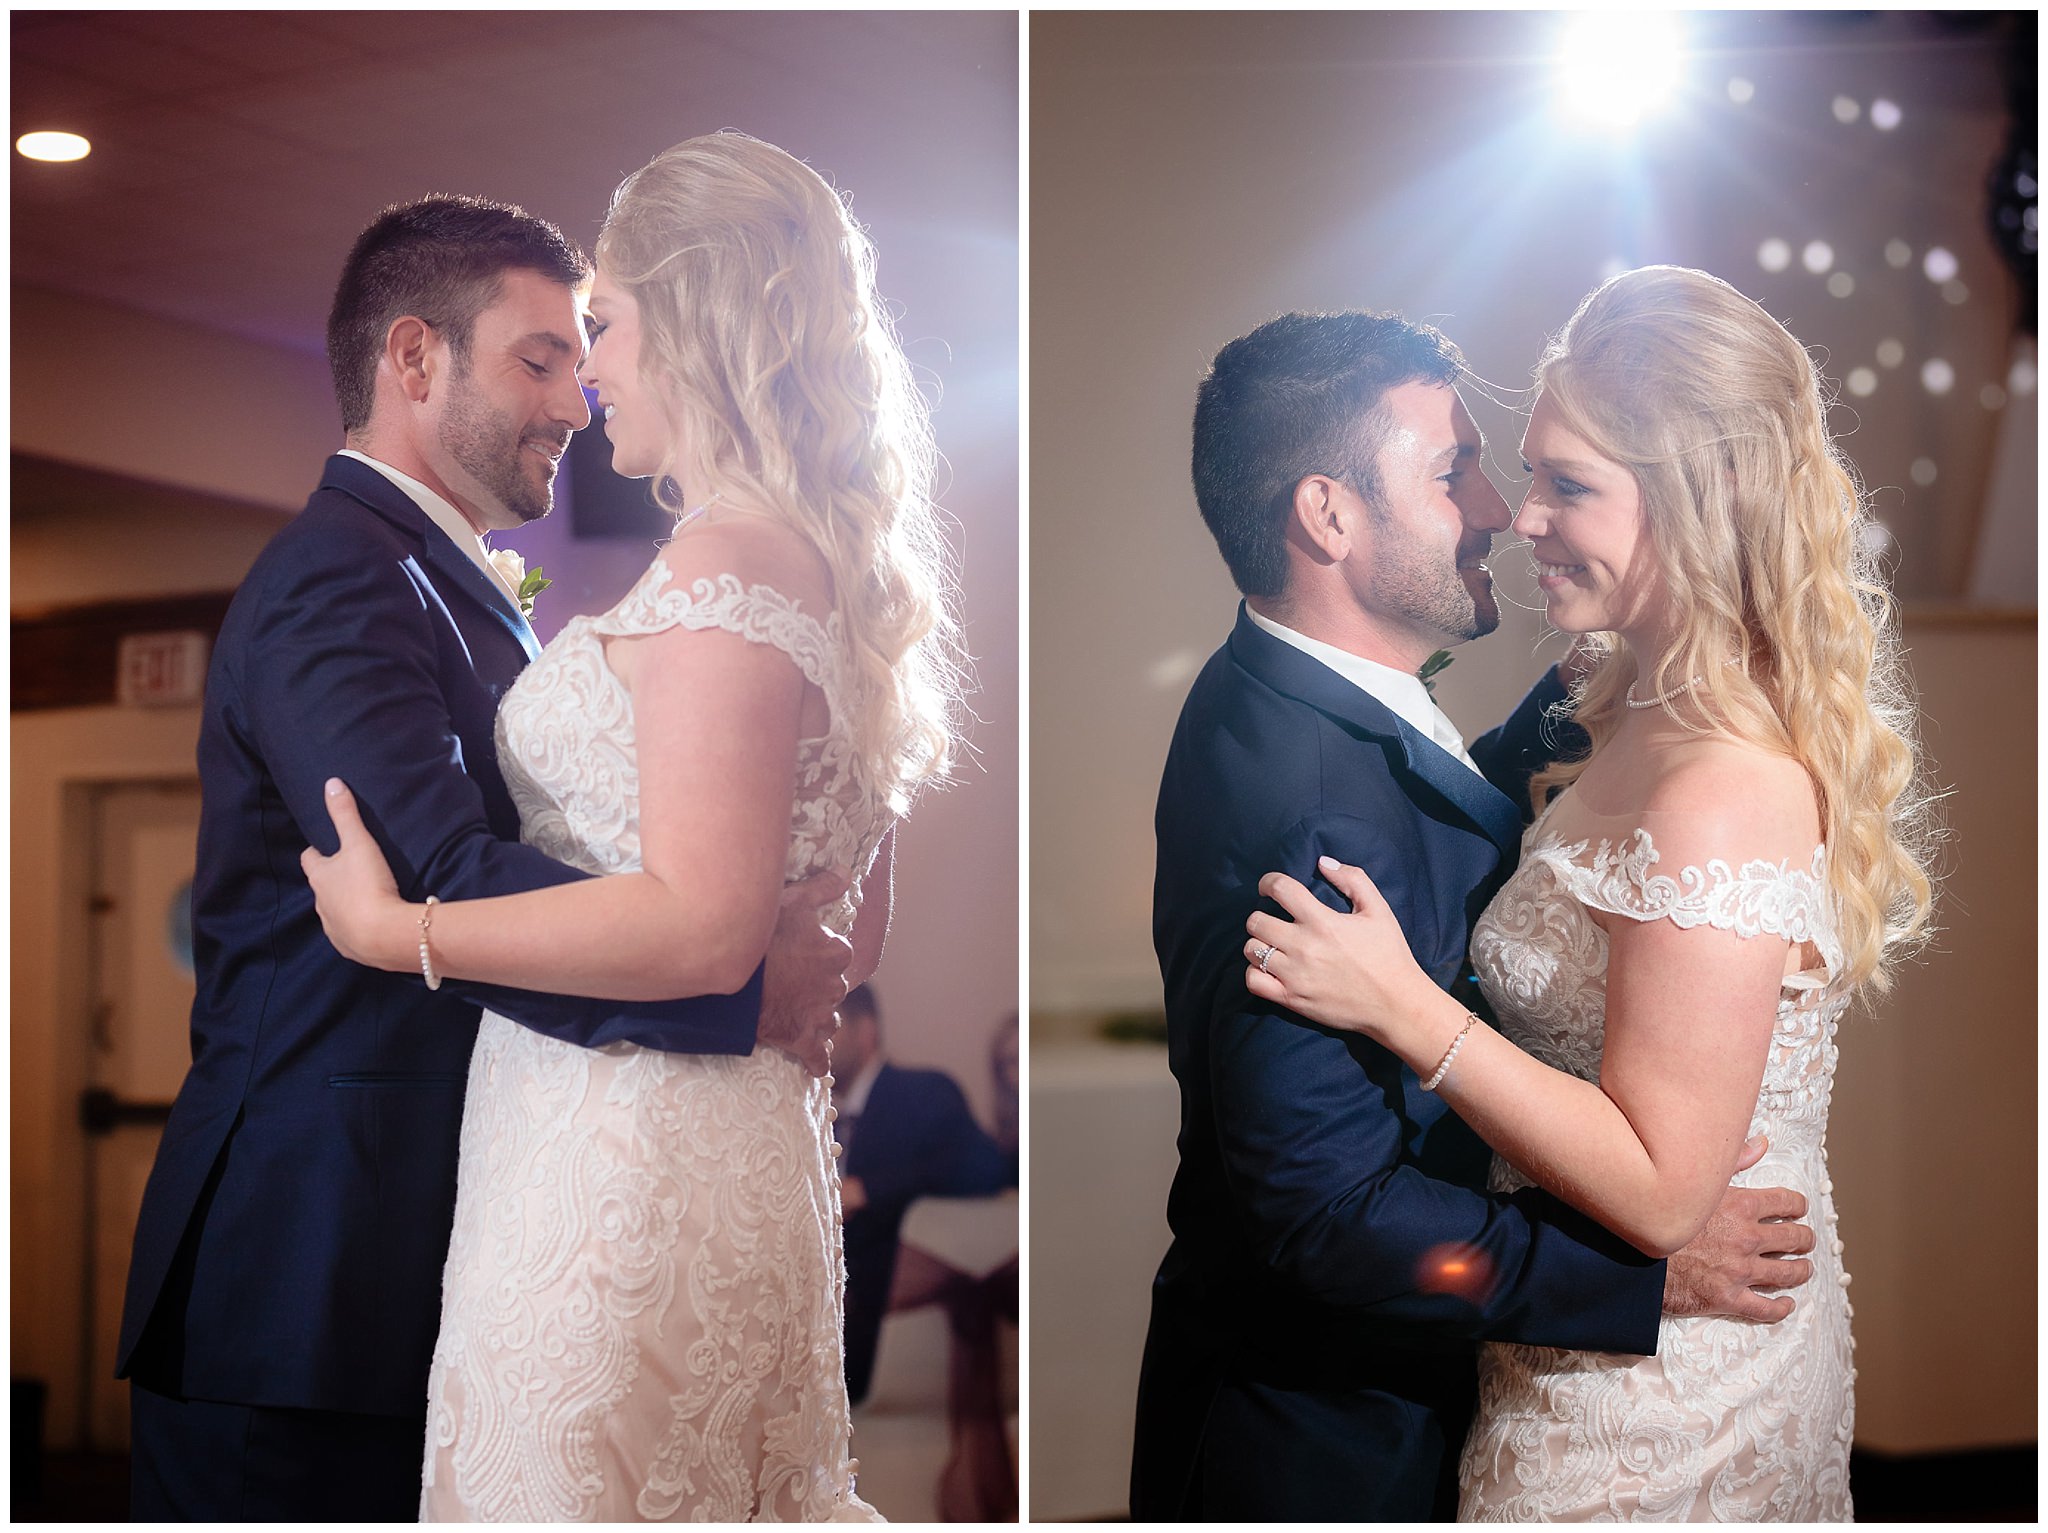 Bride and groom's first dance at their Riverside Landing wedding reception